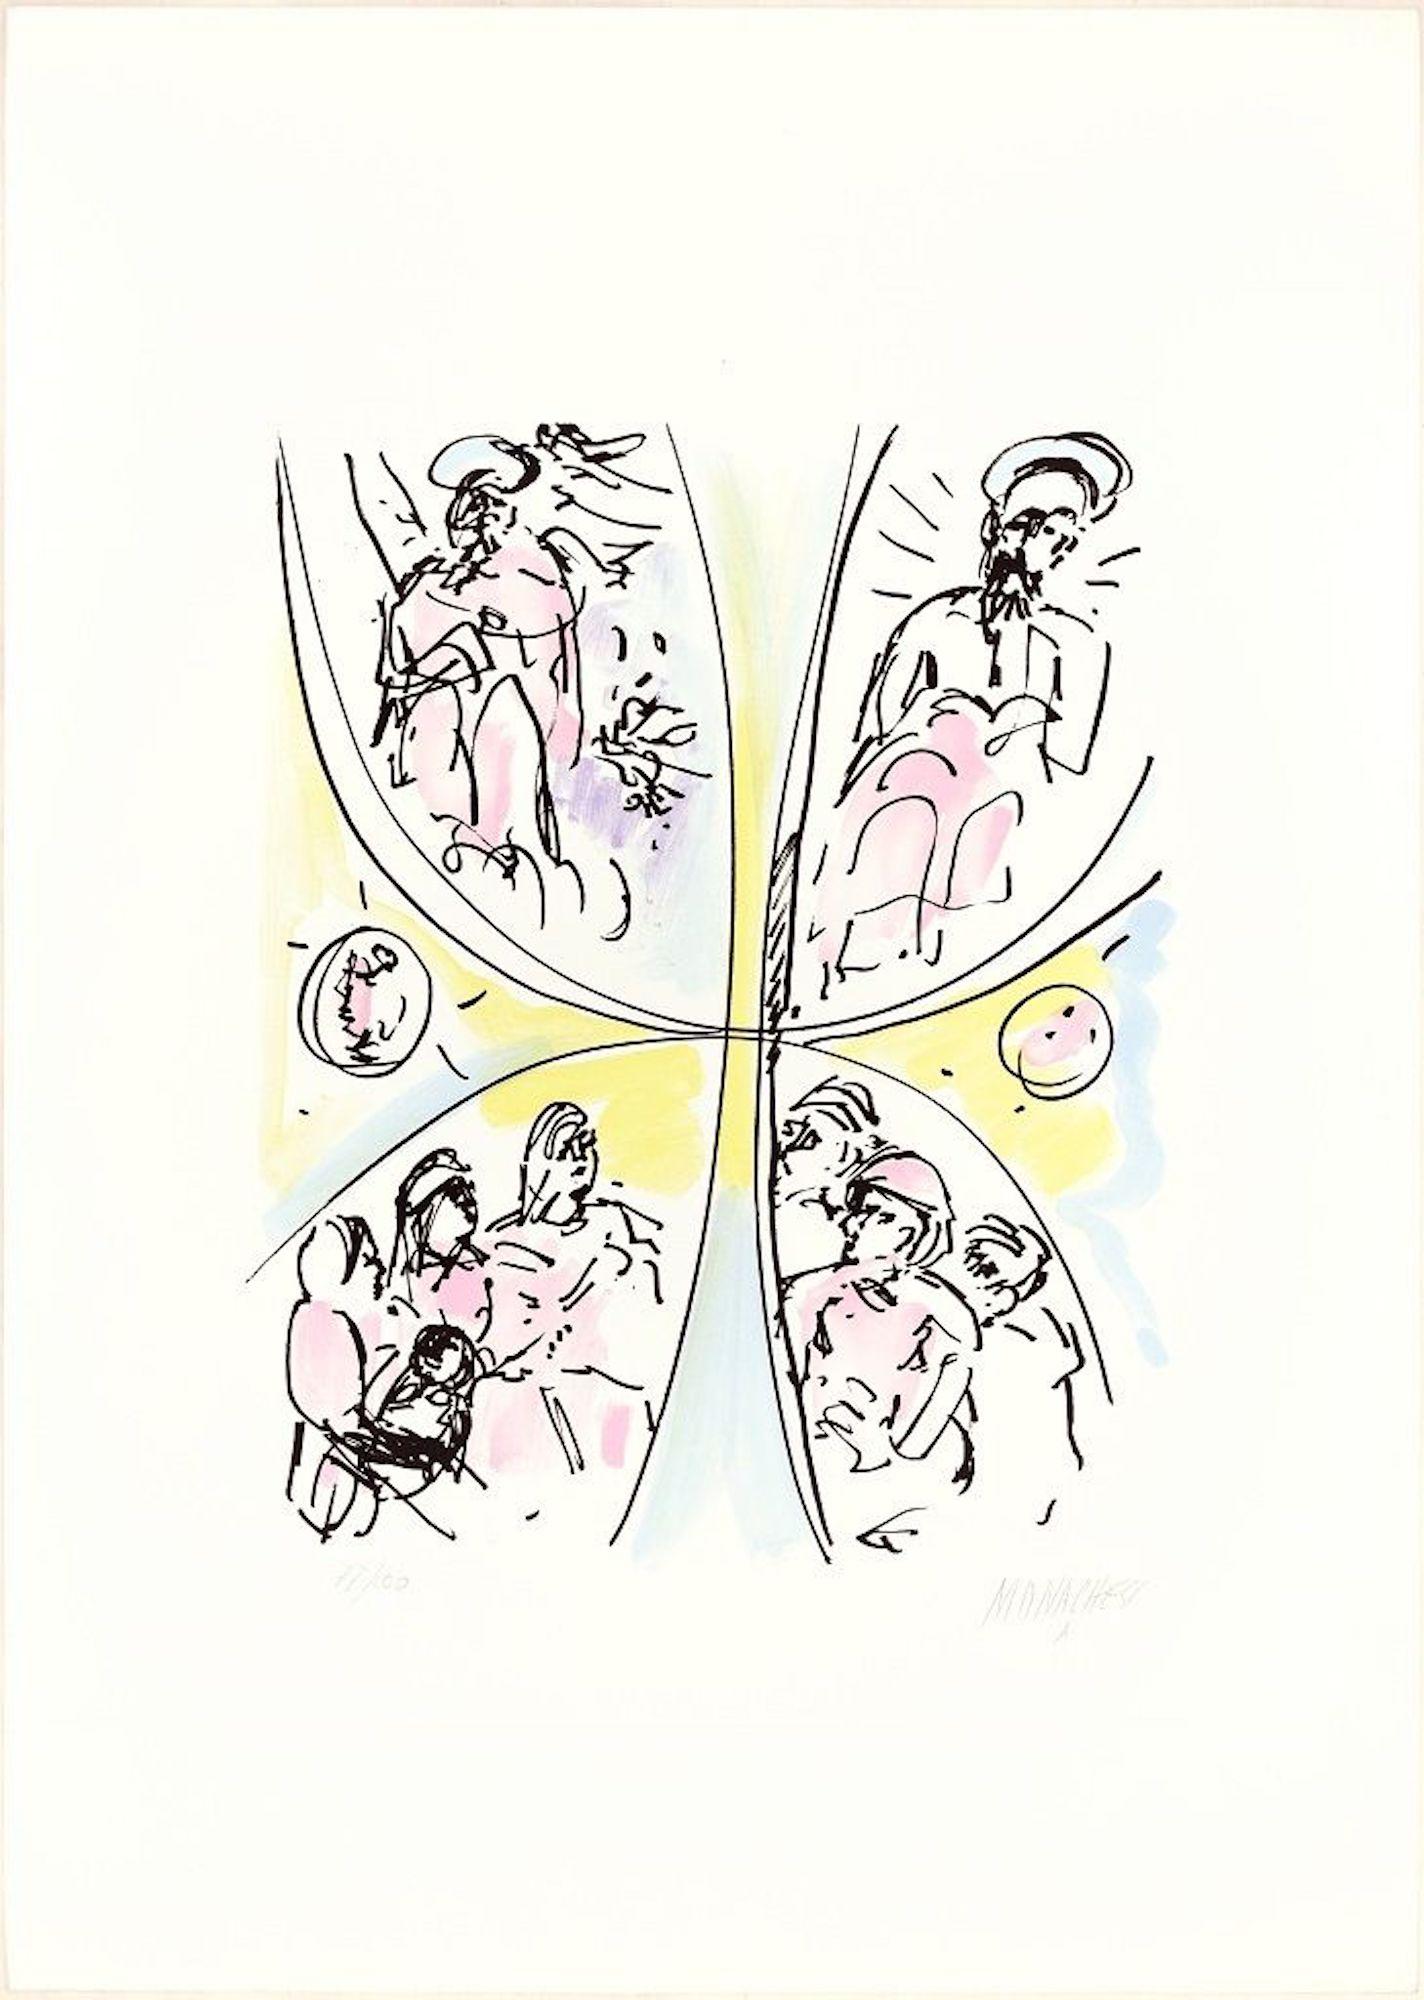 Image dimensions: 39.5 x 34 cm.

Giubileo is a colored lithograph on paper, realized by the Italian artist Sante Monachesi.

Signed and numbered in pencil on the lower margin. Edition of 100 prints.

In excellent conditions, this beautiful and